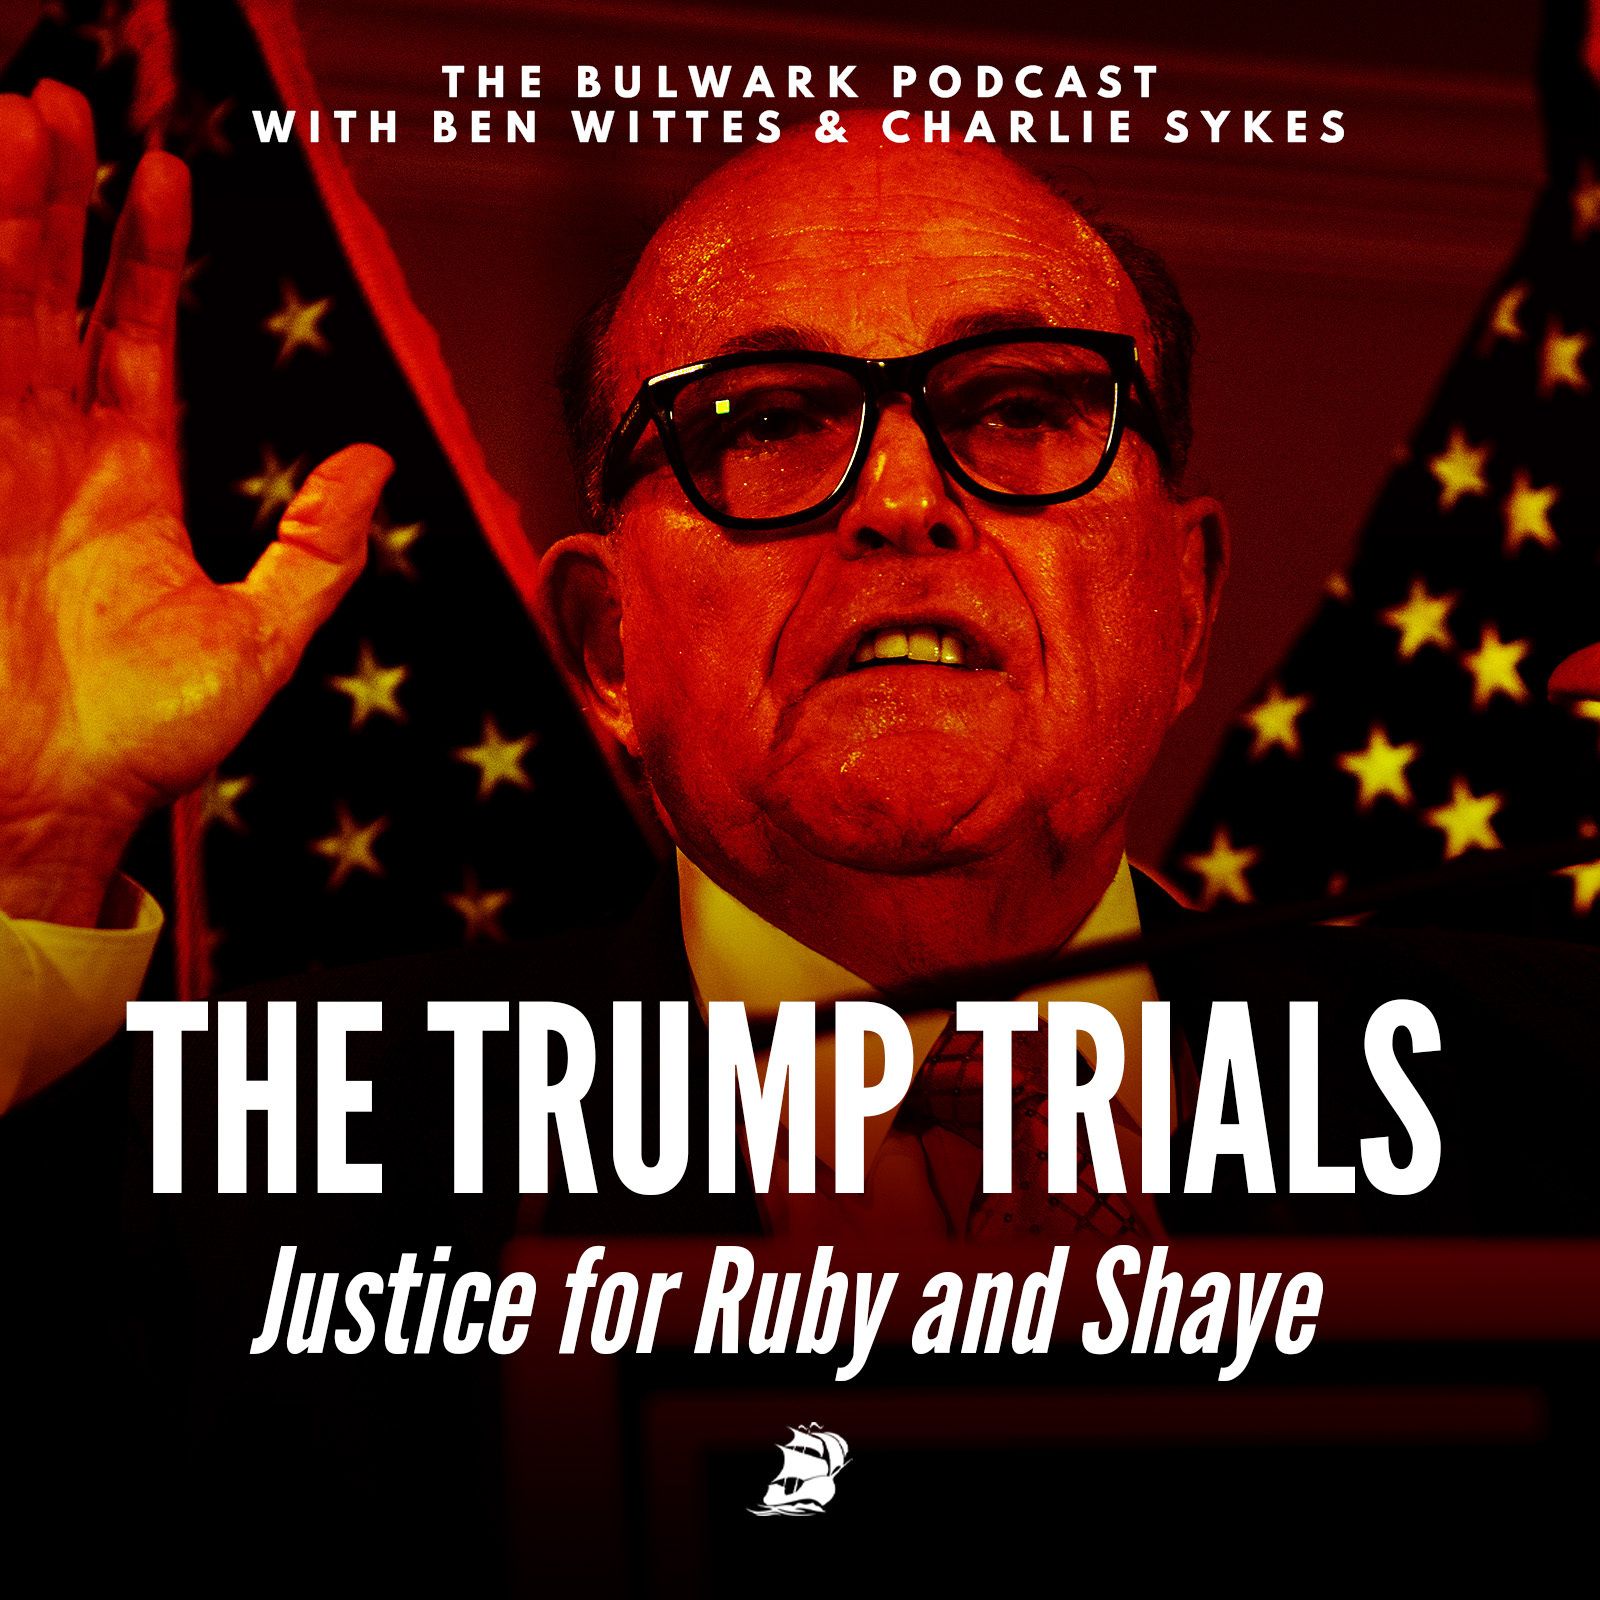 Justice for Ruby and Shaye by The Bulwark Podcast